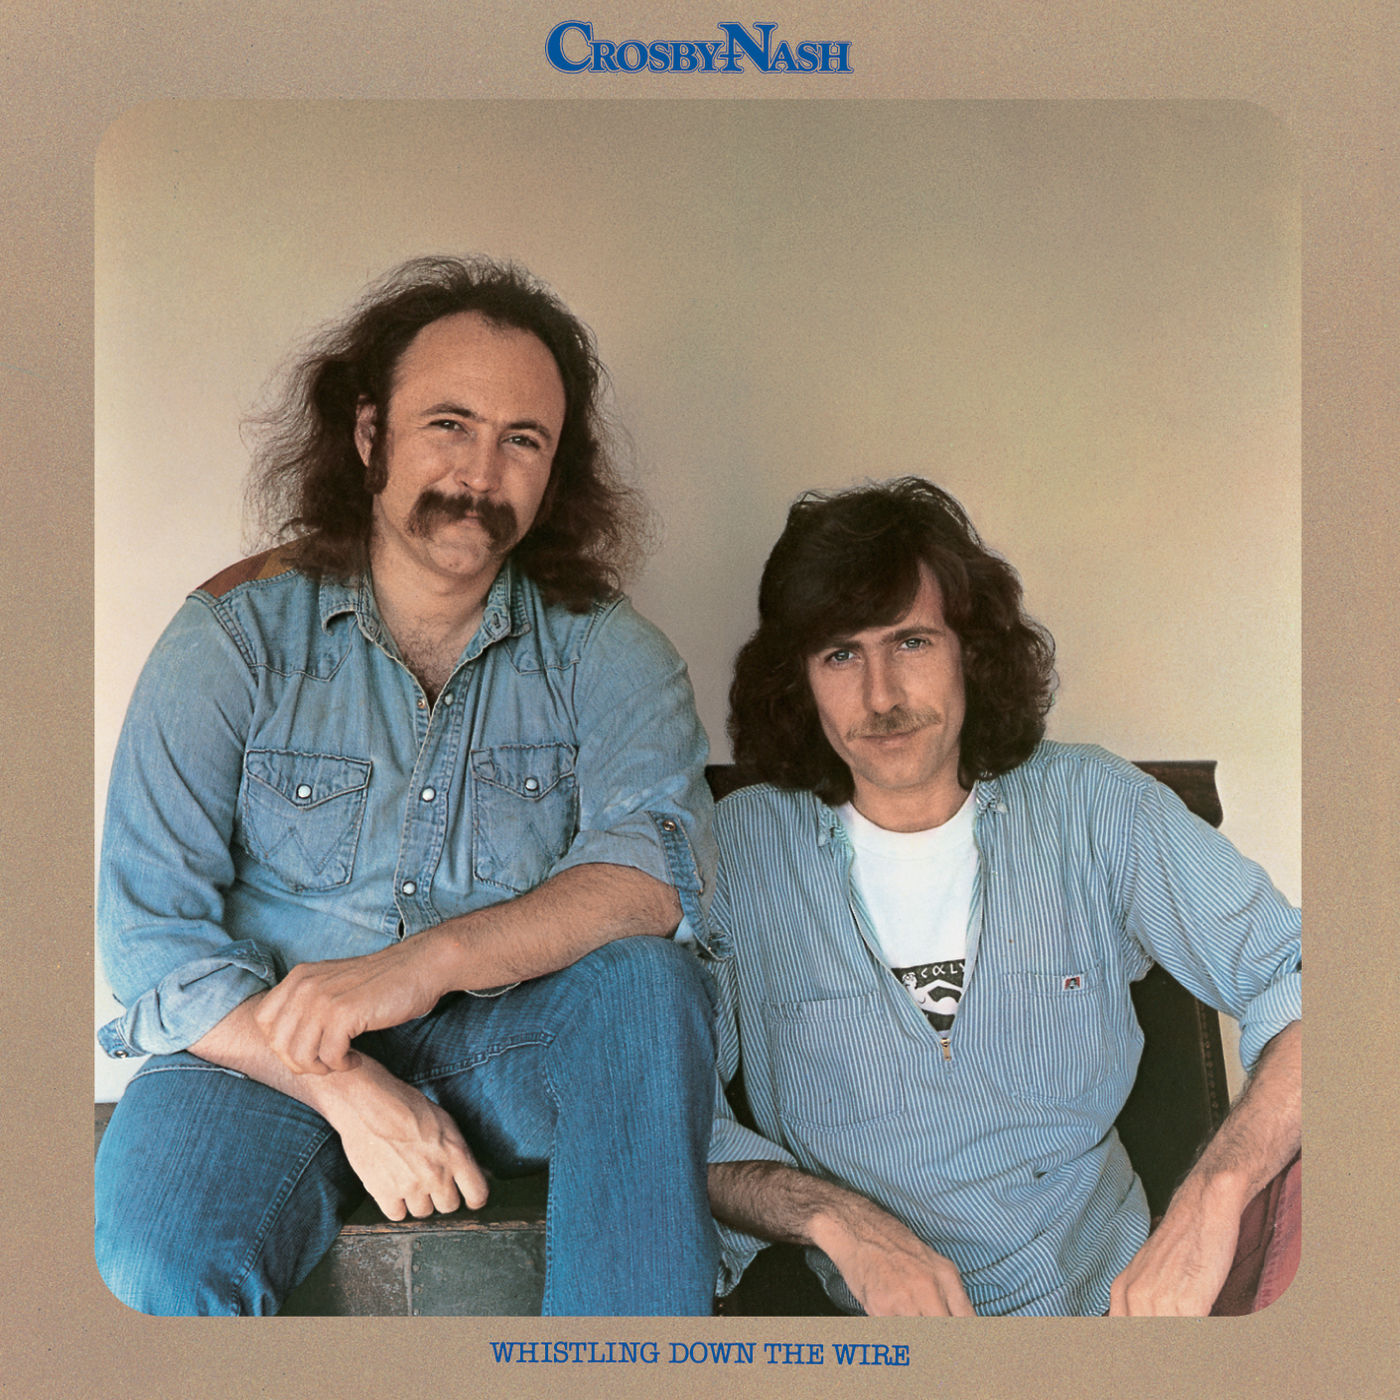 David Crosby, Graham Nash – Whistling Down The Wire (1976/2021) [Official Digital Download 24bit/96kHz]